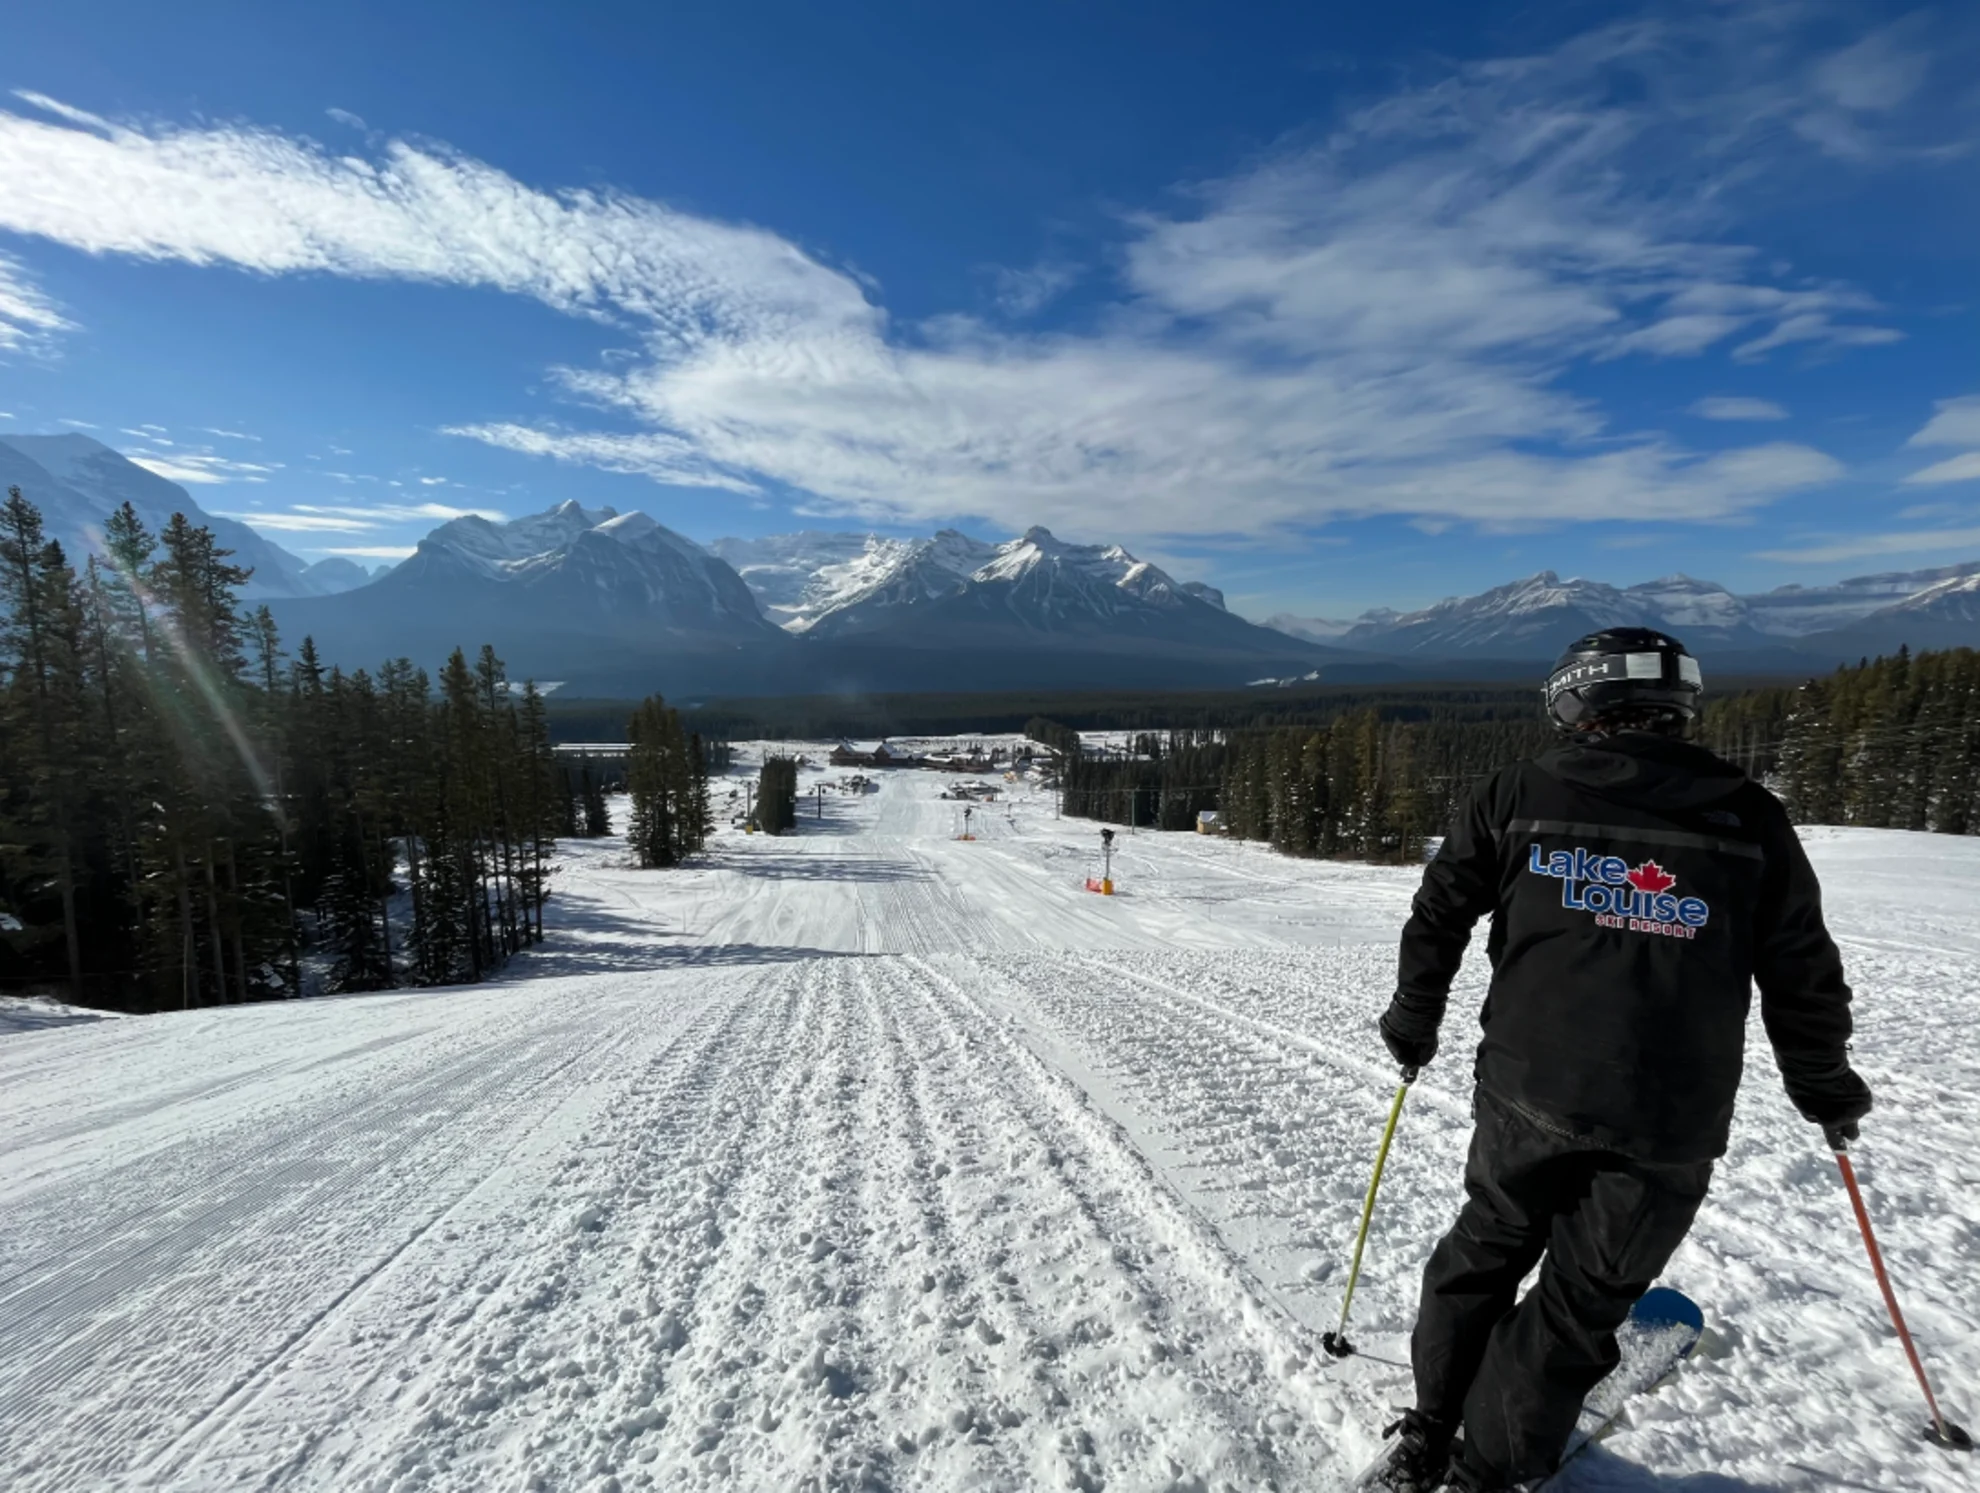 Some Alberta ski hills open this weekend for keeners looking to hit the slopes